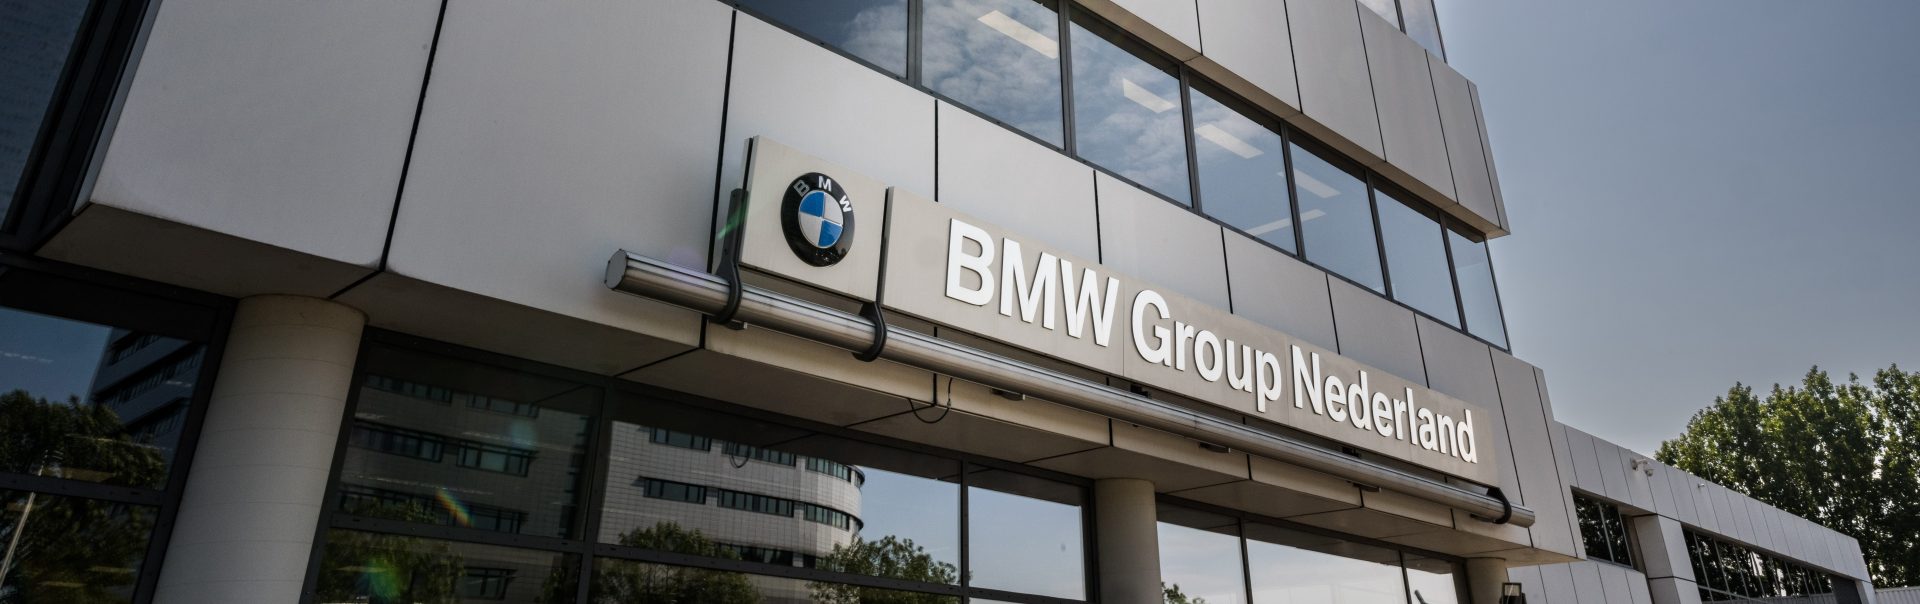 The image shows the BMW Group Netherlands.